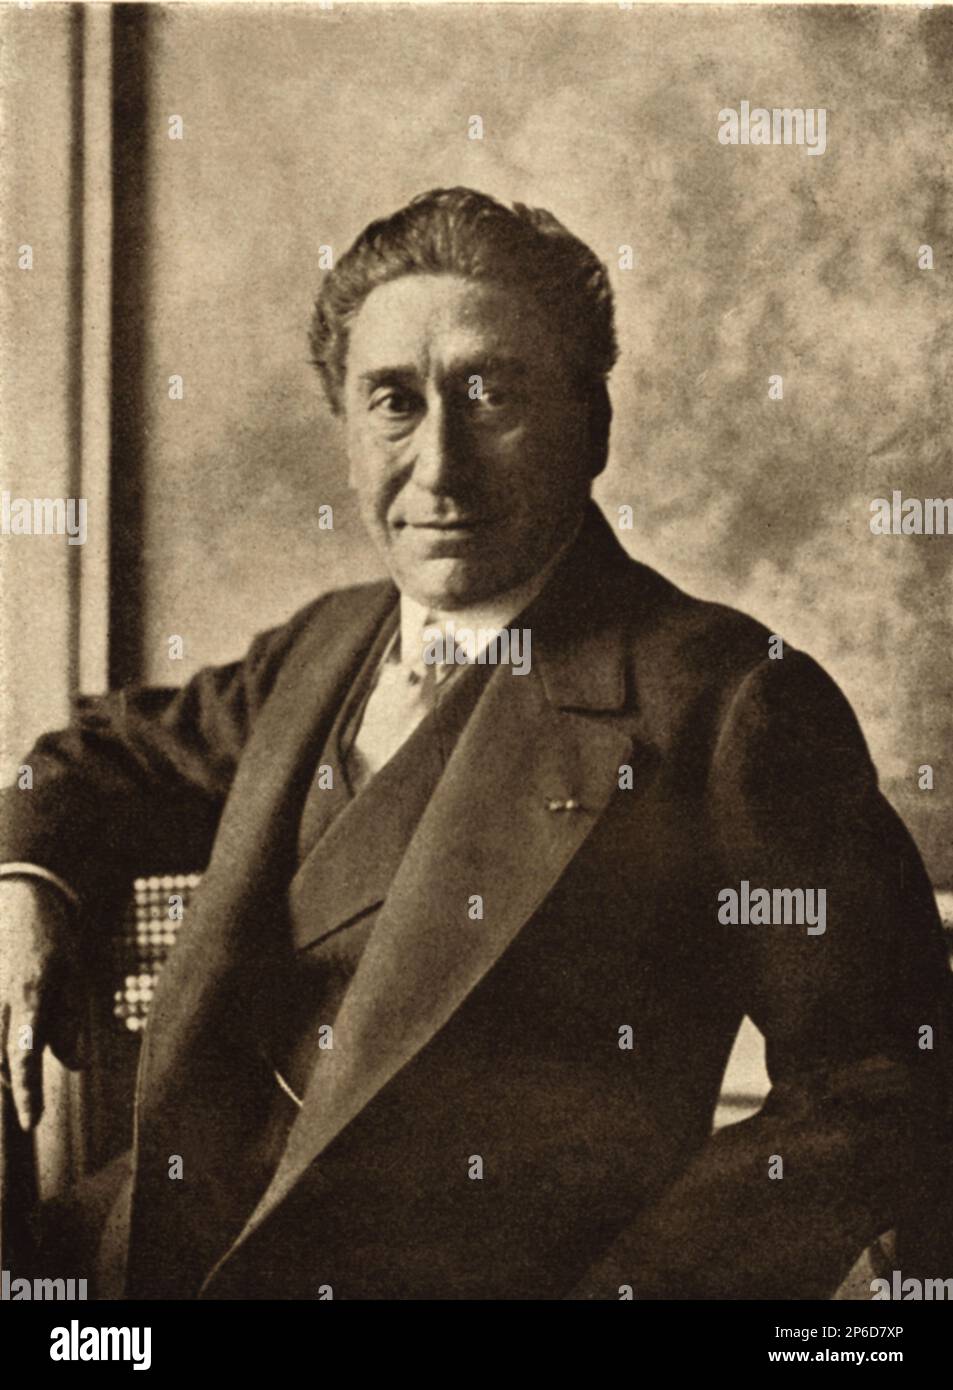 1910 c, ITALY : The italian actor ERMETE NOVELLI ( 1851 - 1919 ) , founder of first italian Teatro Stabile company ' Casa Goldoni ' at Teatro Valle in Rome  . Married with actress Olga Giannini Novelli . - attrice - TEATRO - THEATER - THEATRE - attore teatrale  ----  Archivio GBB Stock Photo